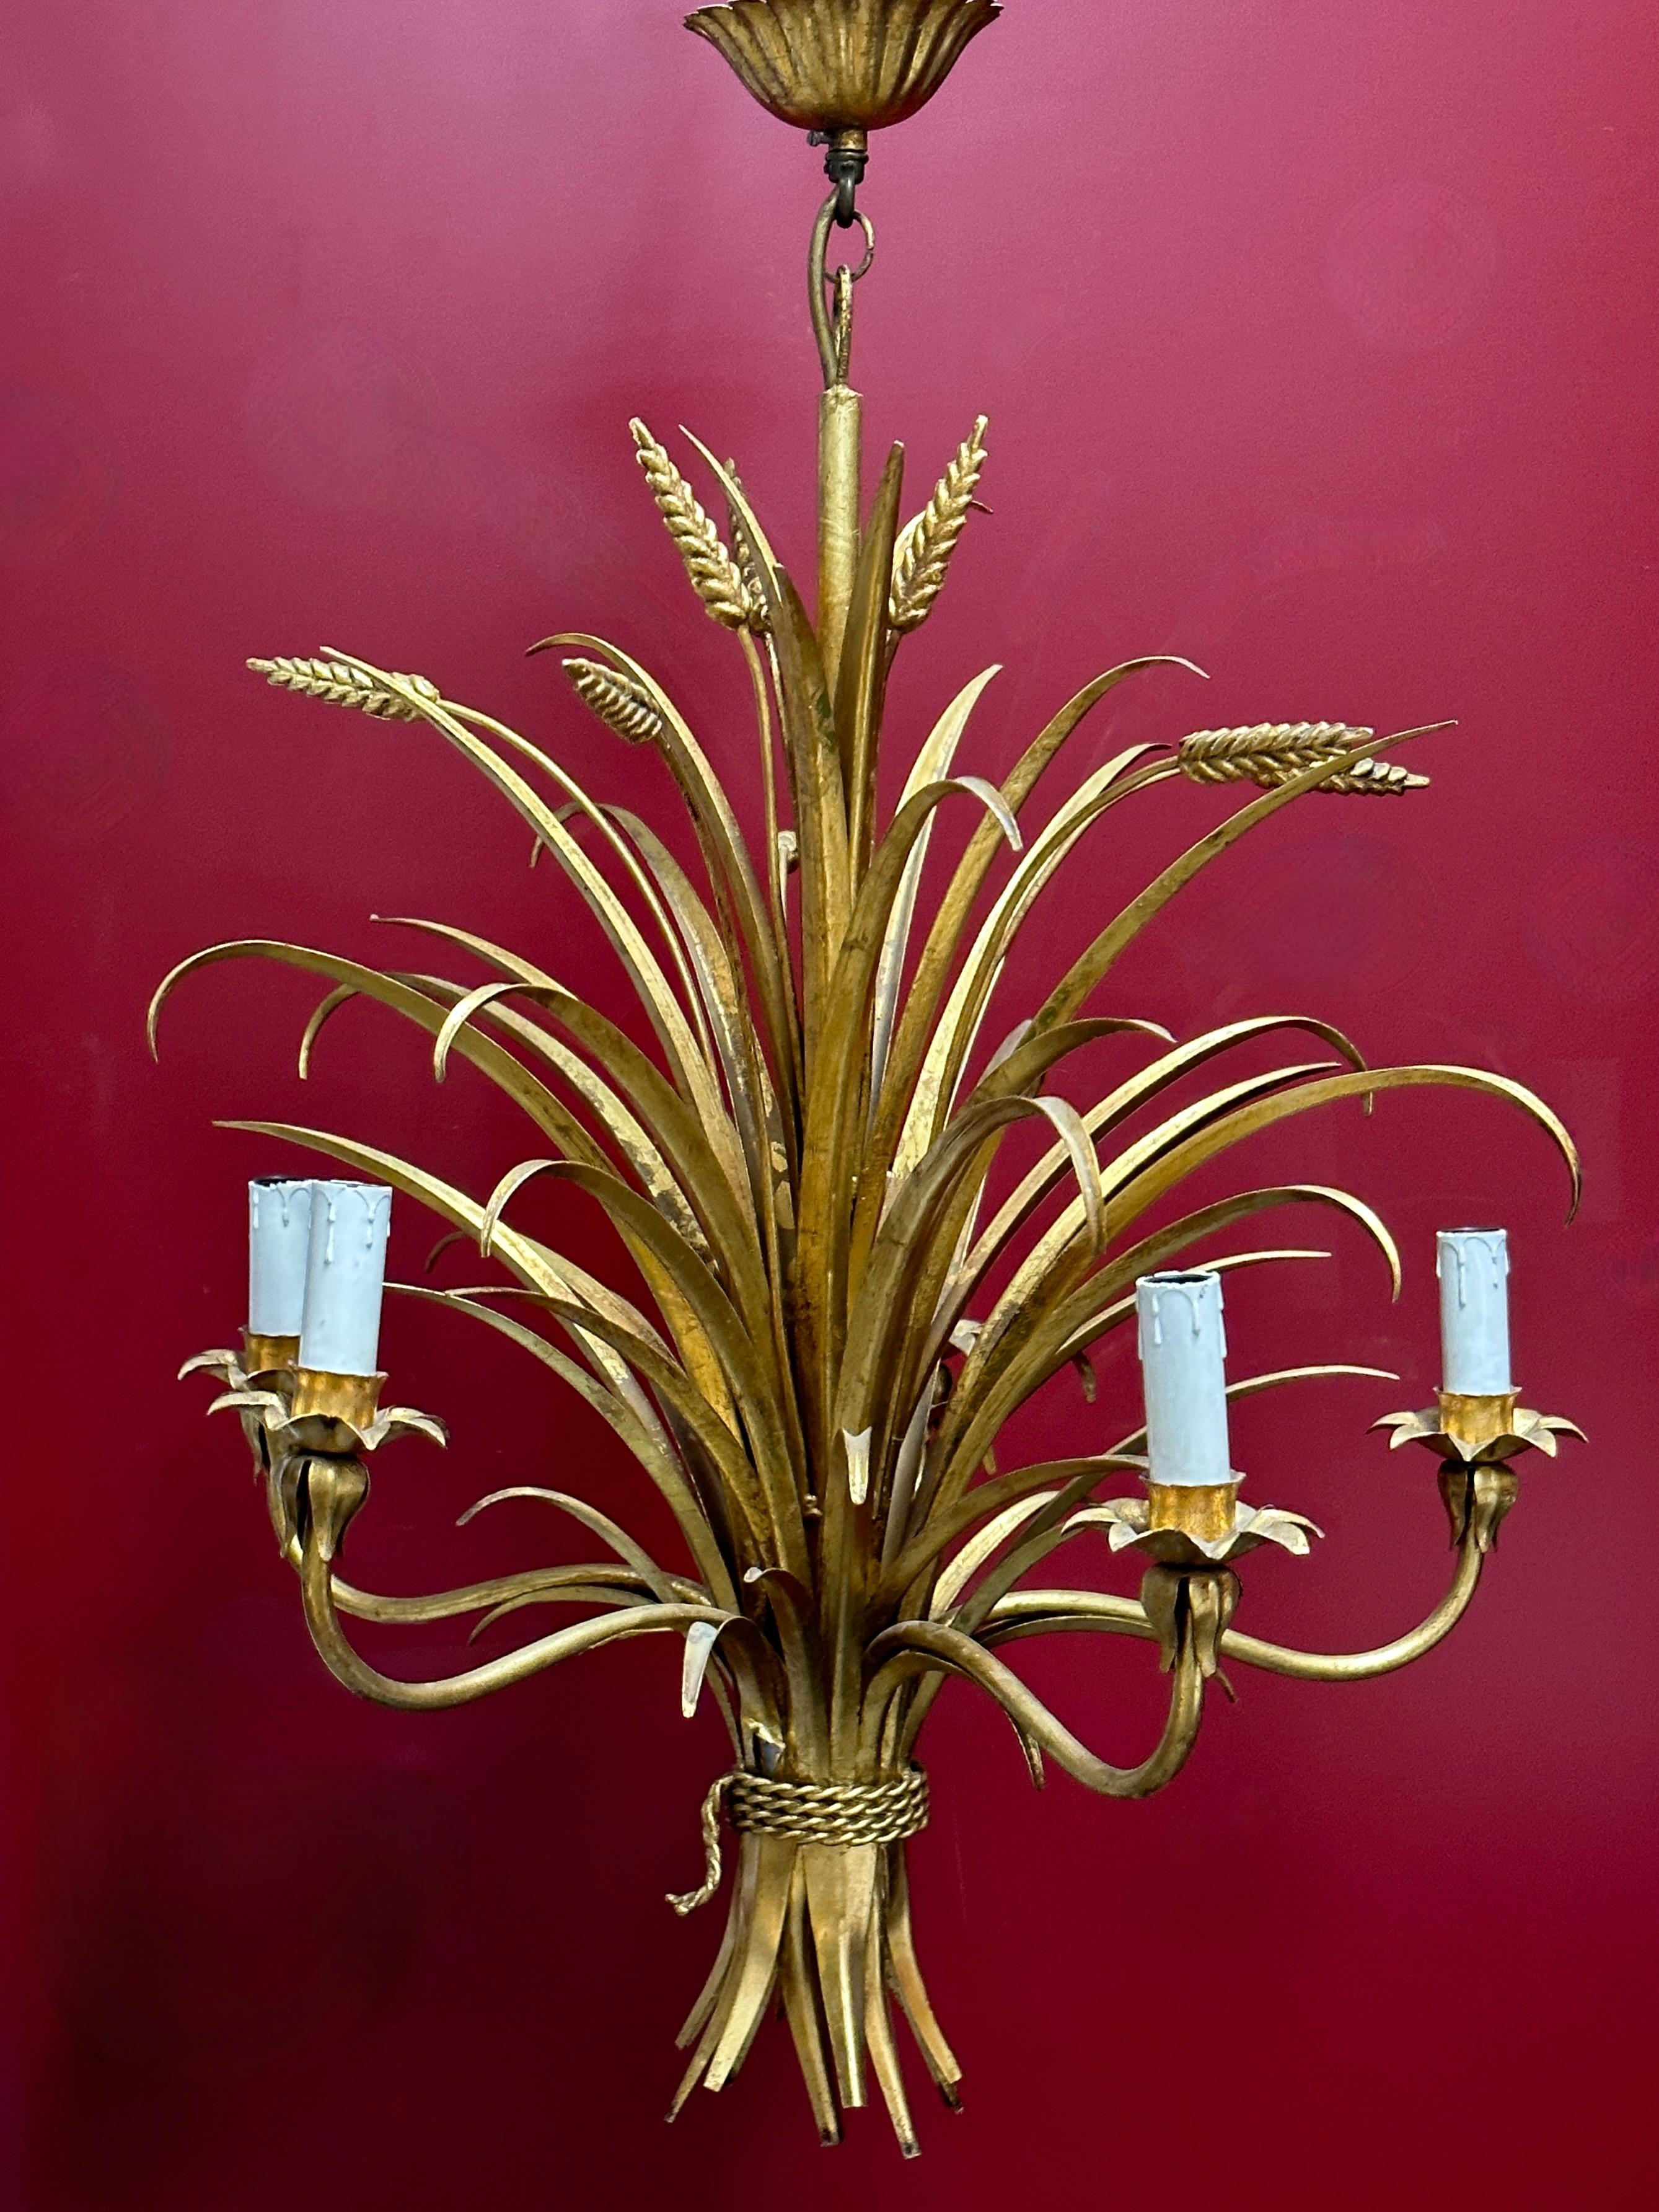 Gilt german Floral sheaf of wheat five-light chandelier Coco Chanel Hollywood Regency style, this chandelier, inspired by Coco Chanel, with sheaves of wheat has five branches with teardrop lamp holders. This tole pendant lamp has a warm antique gold